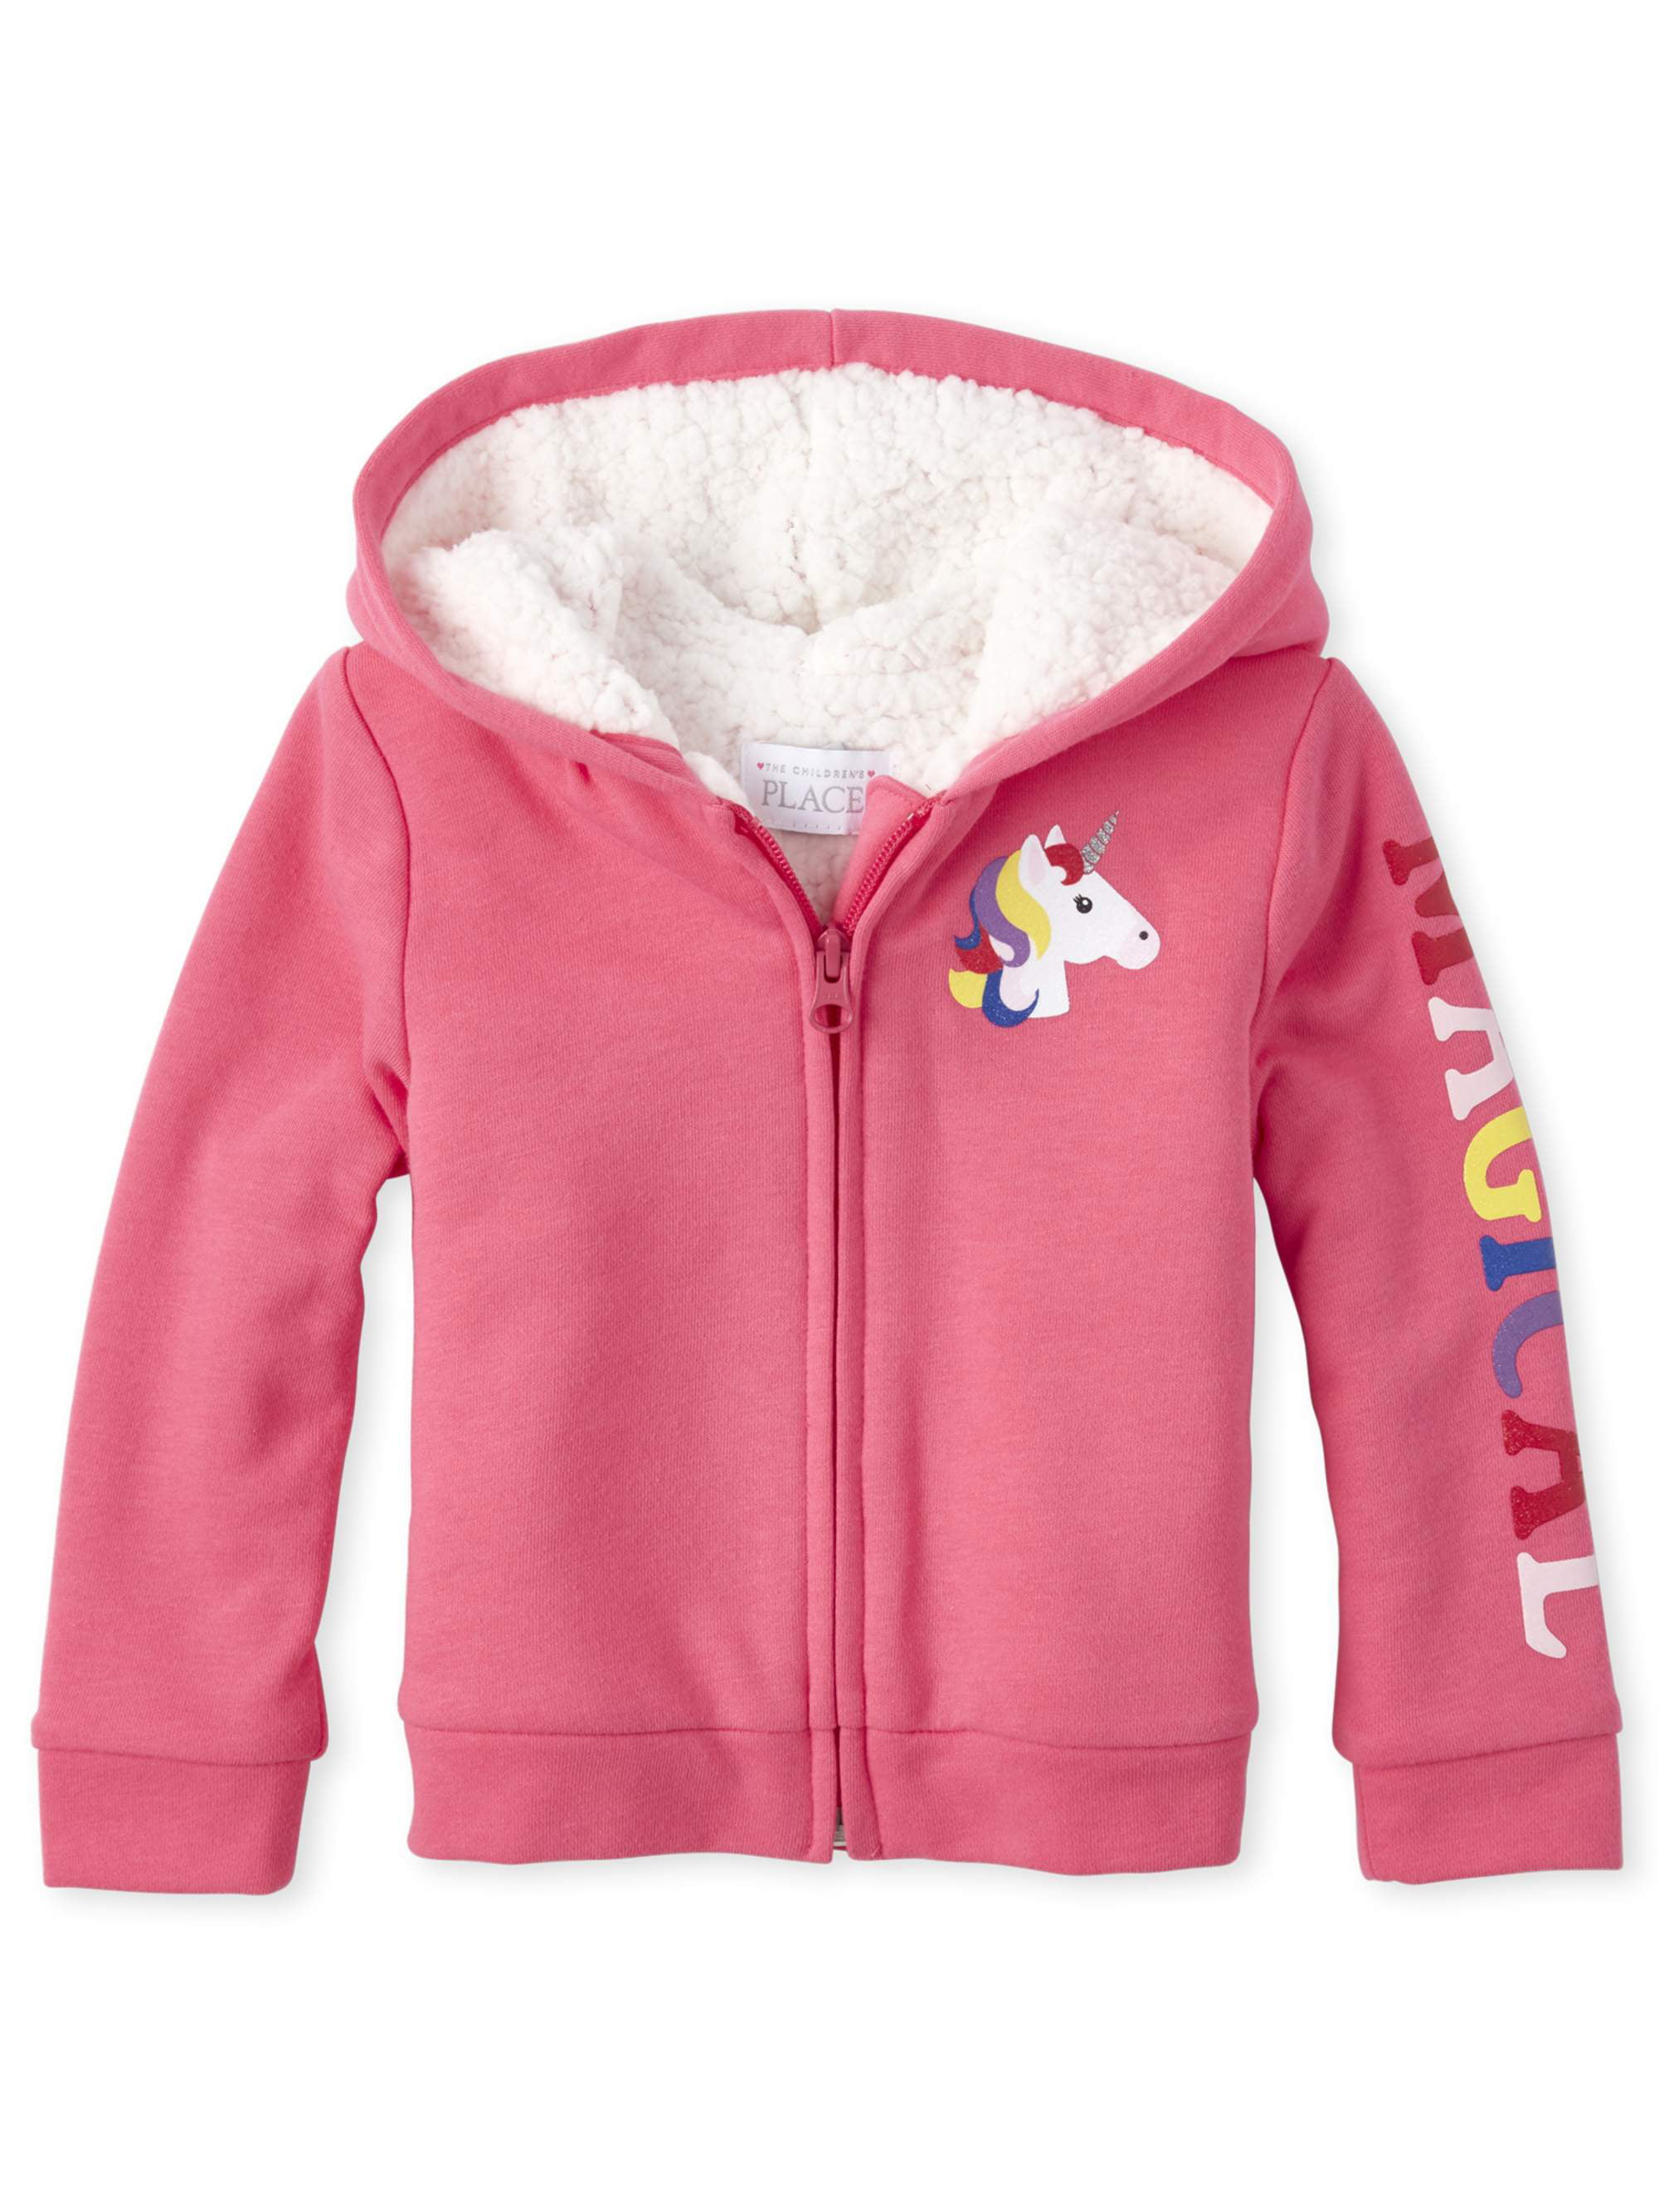 The Childrens Place Baby Girls Hooded Pop Over Sweatshirt